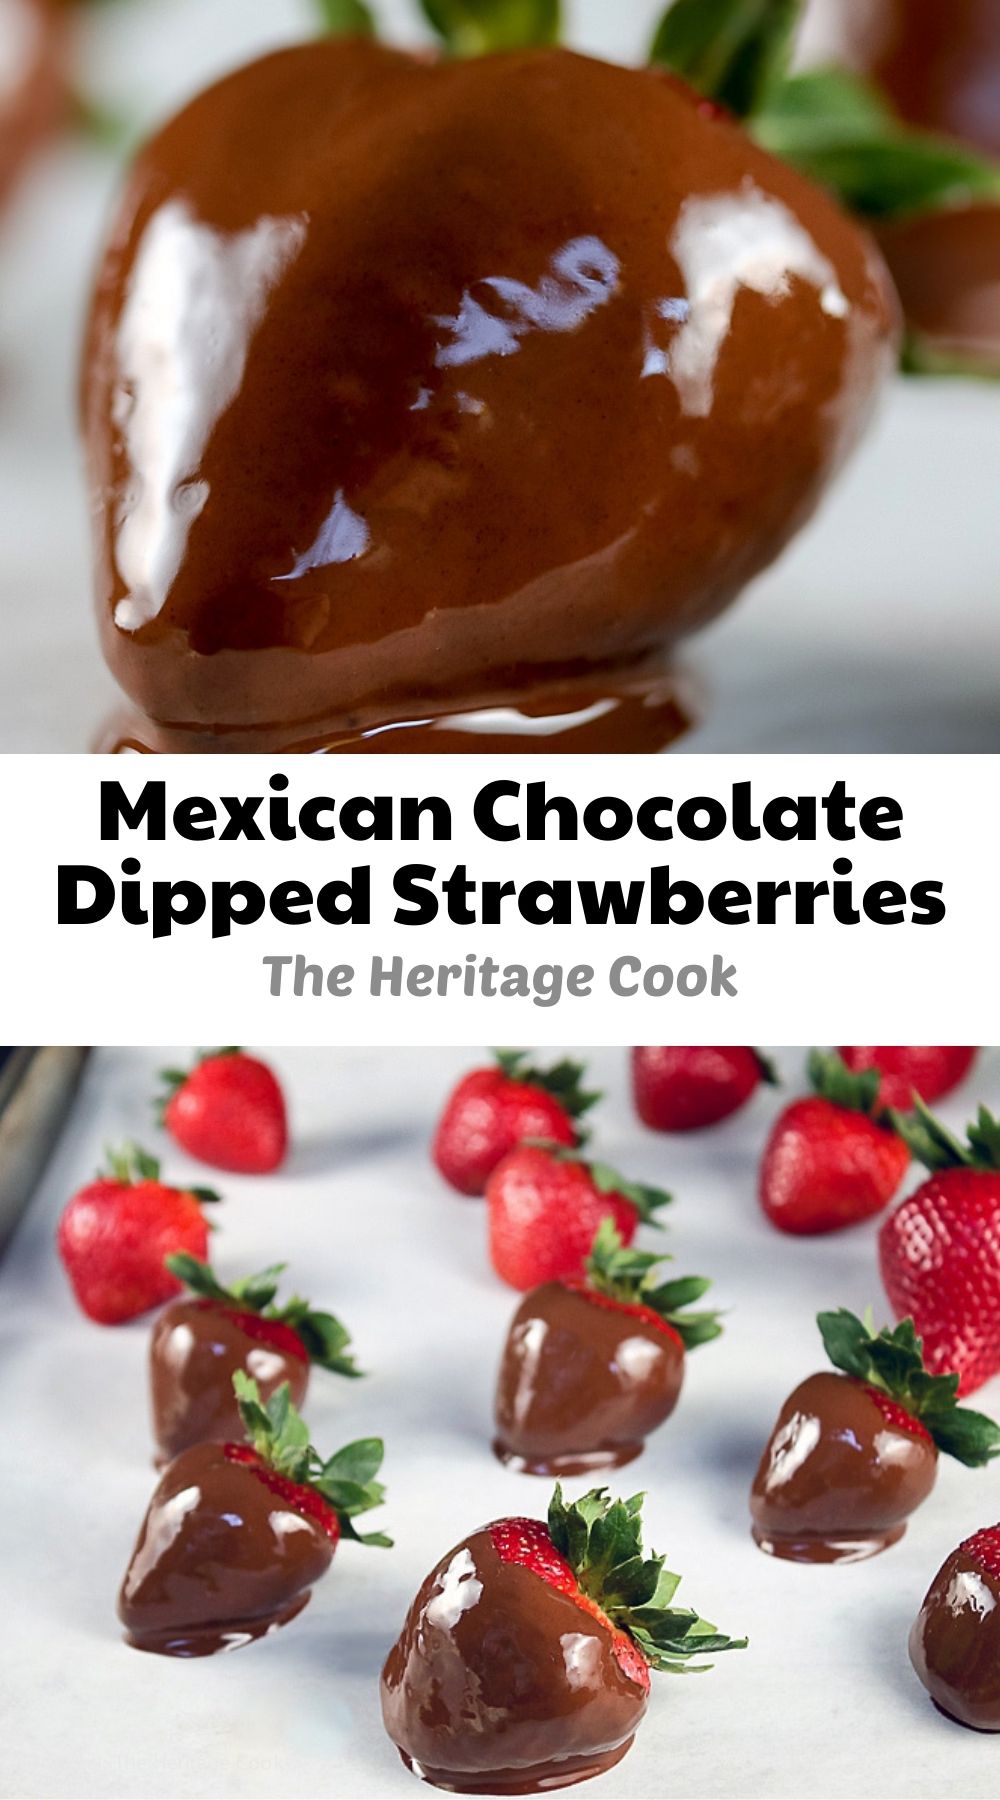 Mexican Chocolate Dipped Strawberries; © 2021 Jane Bonacci, The Heritage Cook